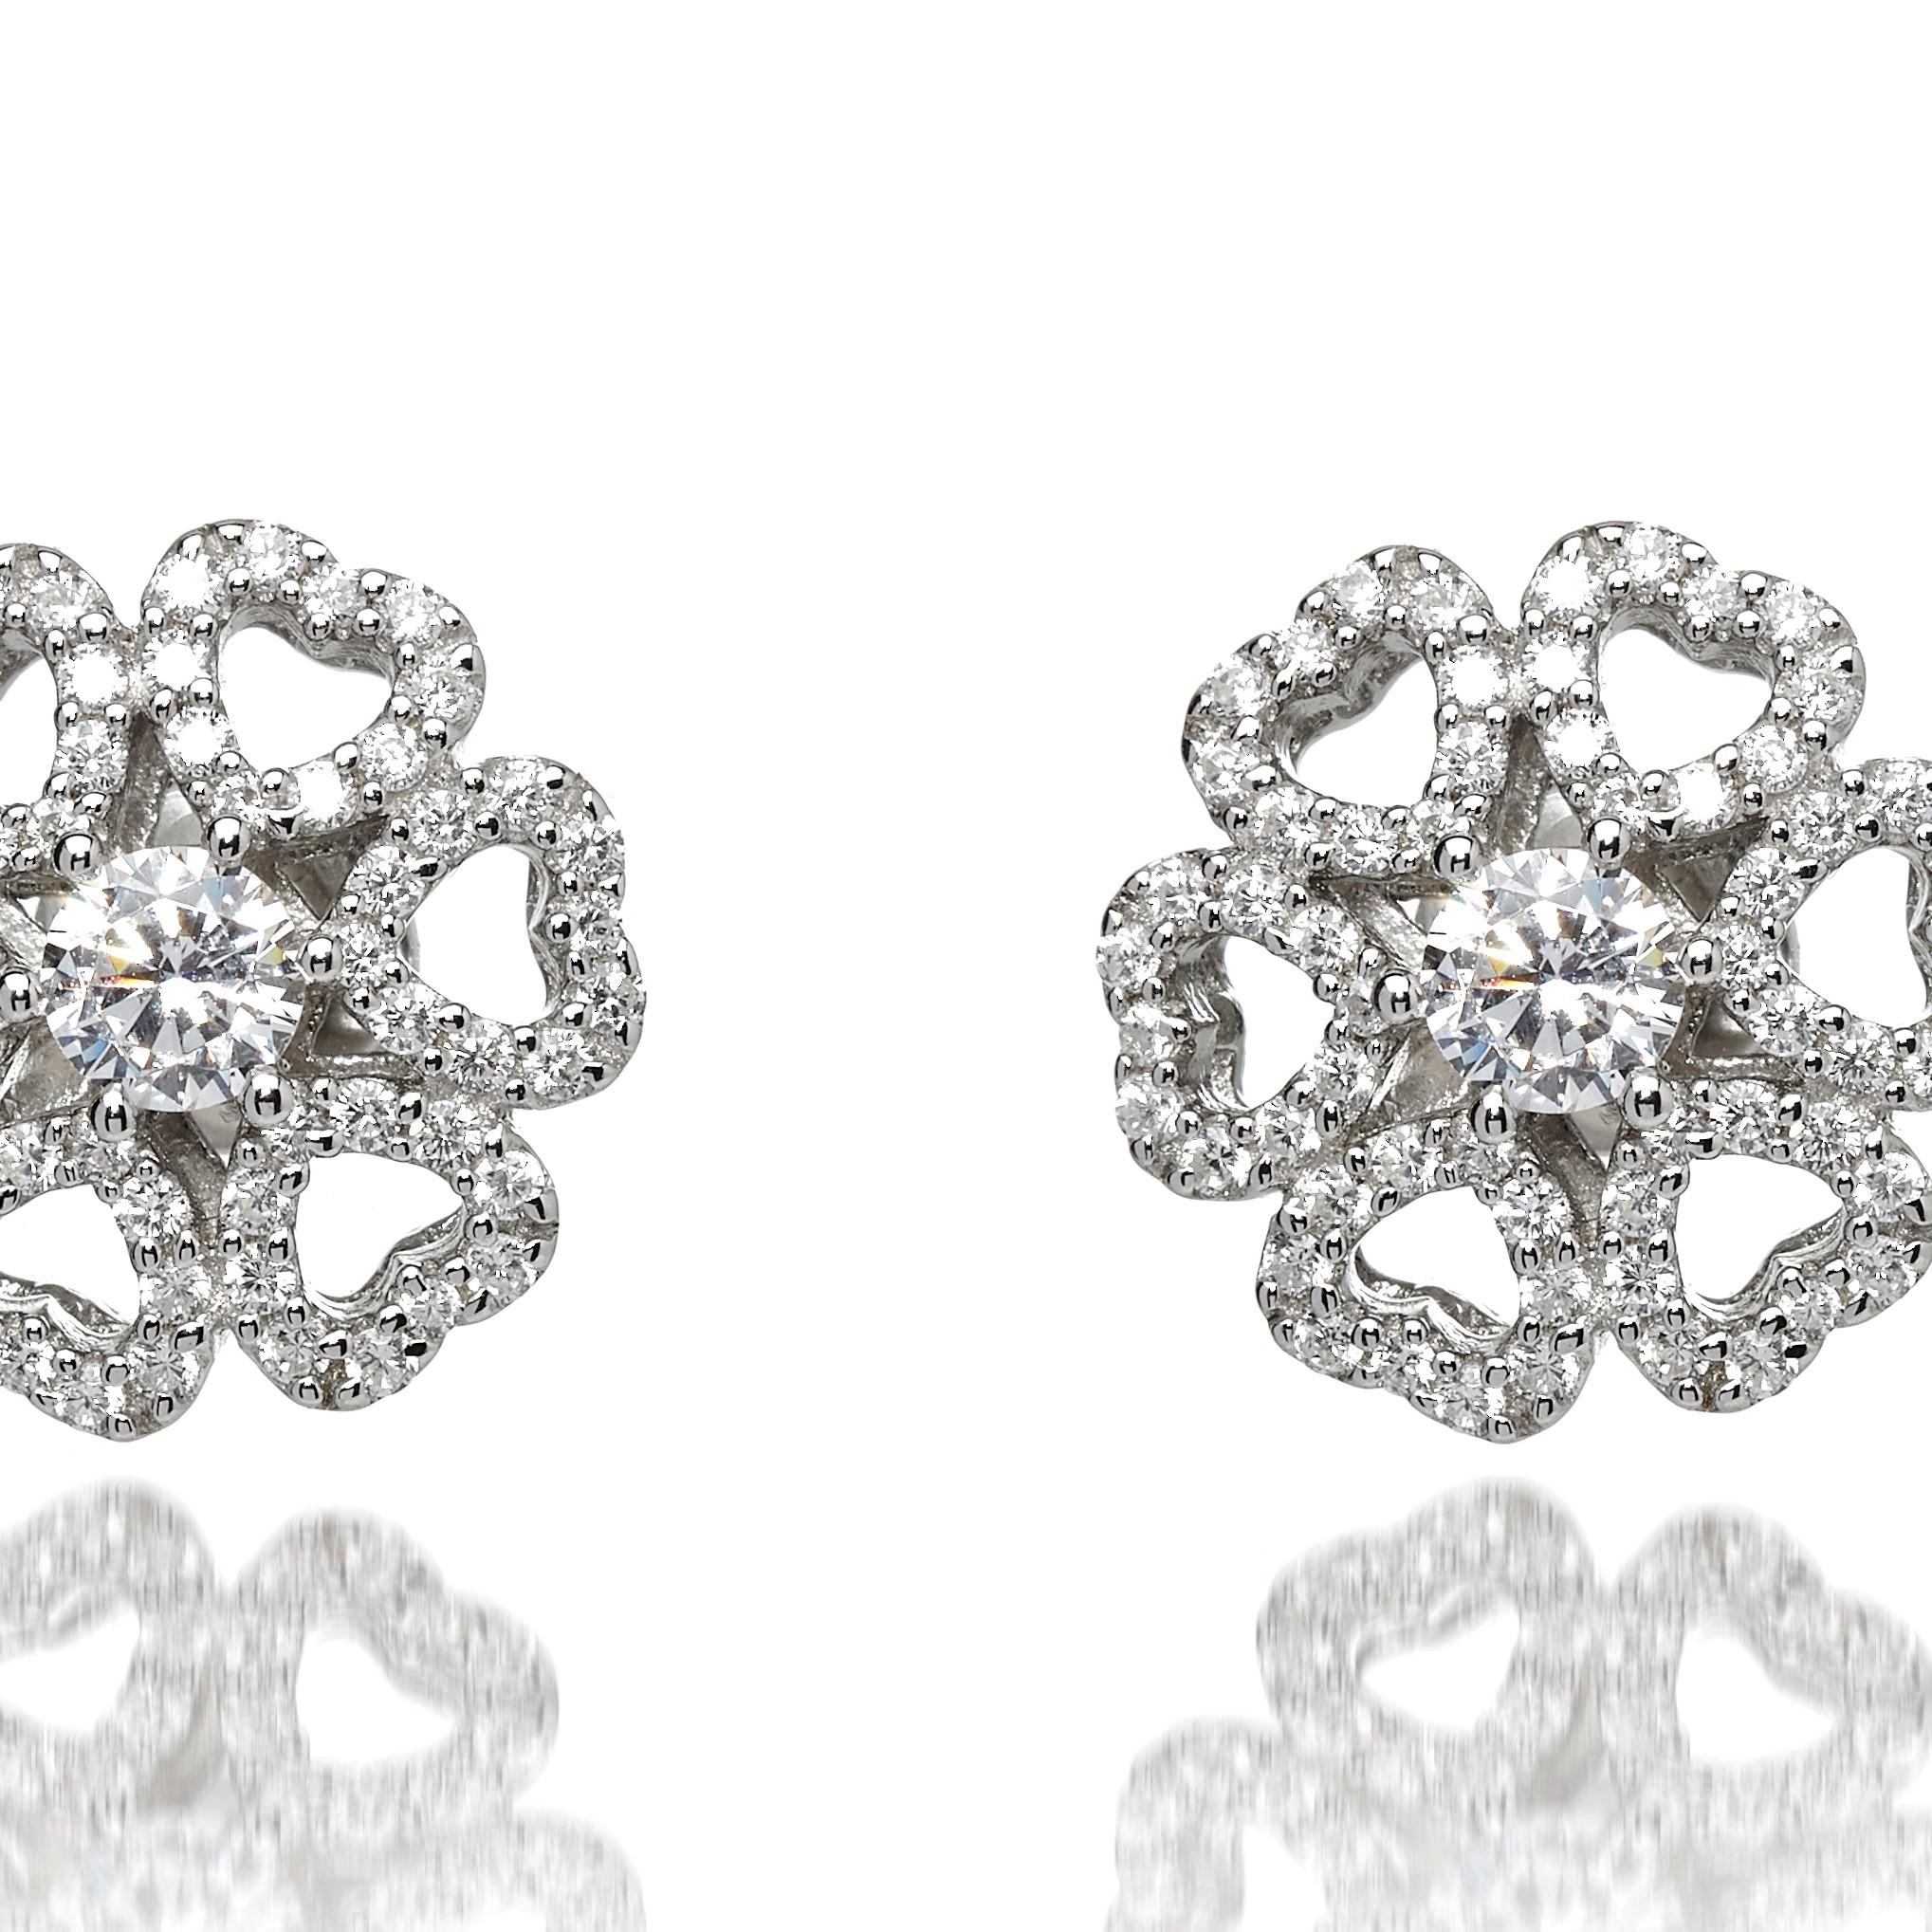 A delicate, feminine pair of stud earrings from our Floral collection. Made to the highest quality standards, these opulent statement studs are sure to leave a lasting impression.

Composed of 925 sterling silver  with a high gloss white rhodium